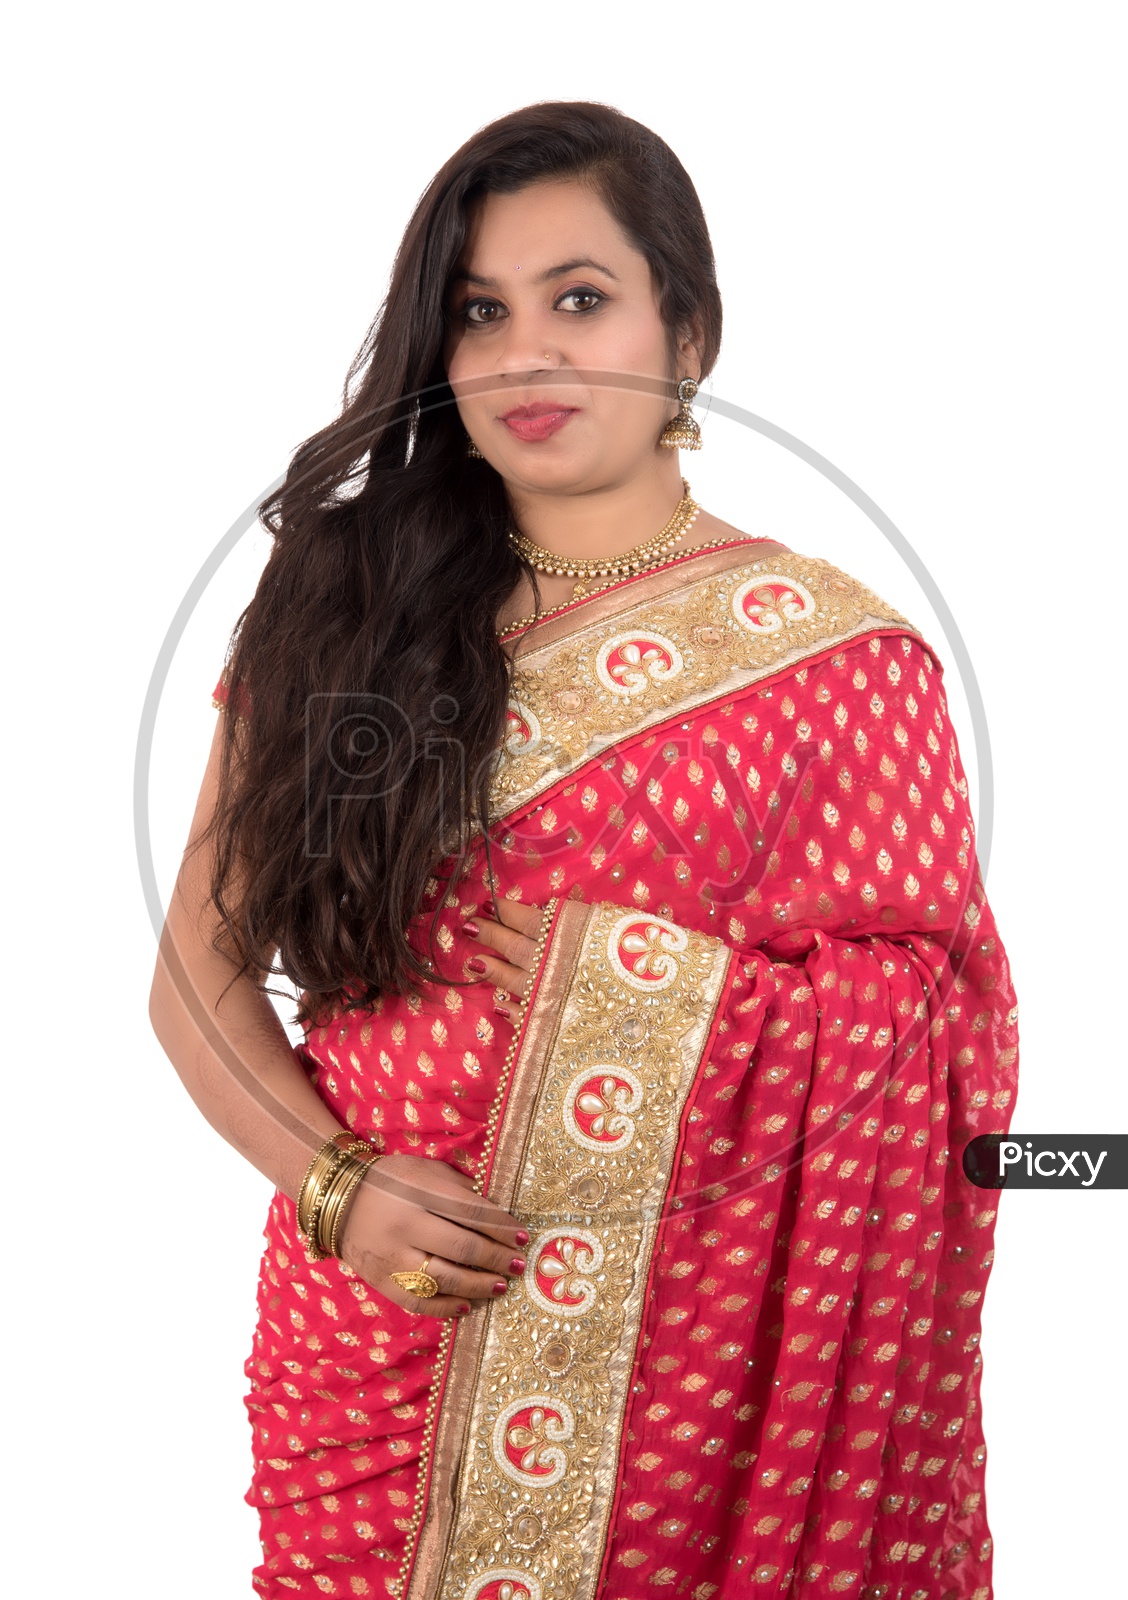 Cropped View Of Indian Woman Posing In Free Stock Photo and Image 242677030